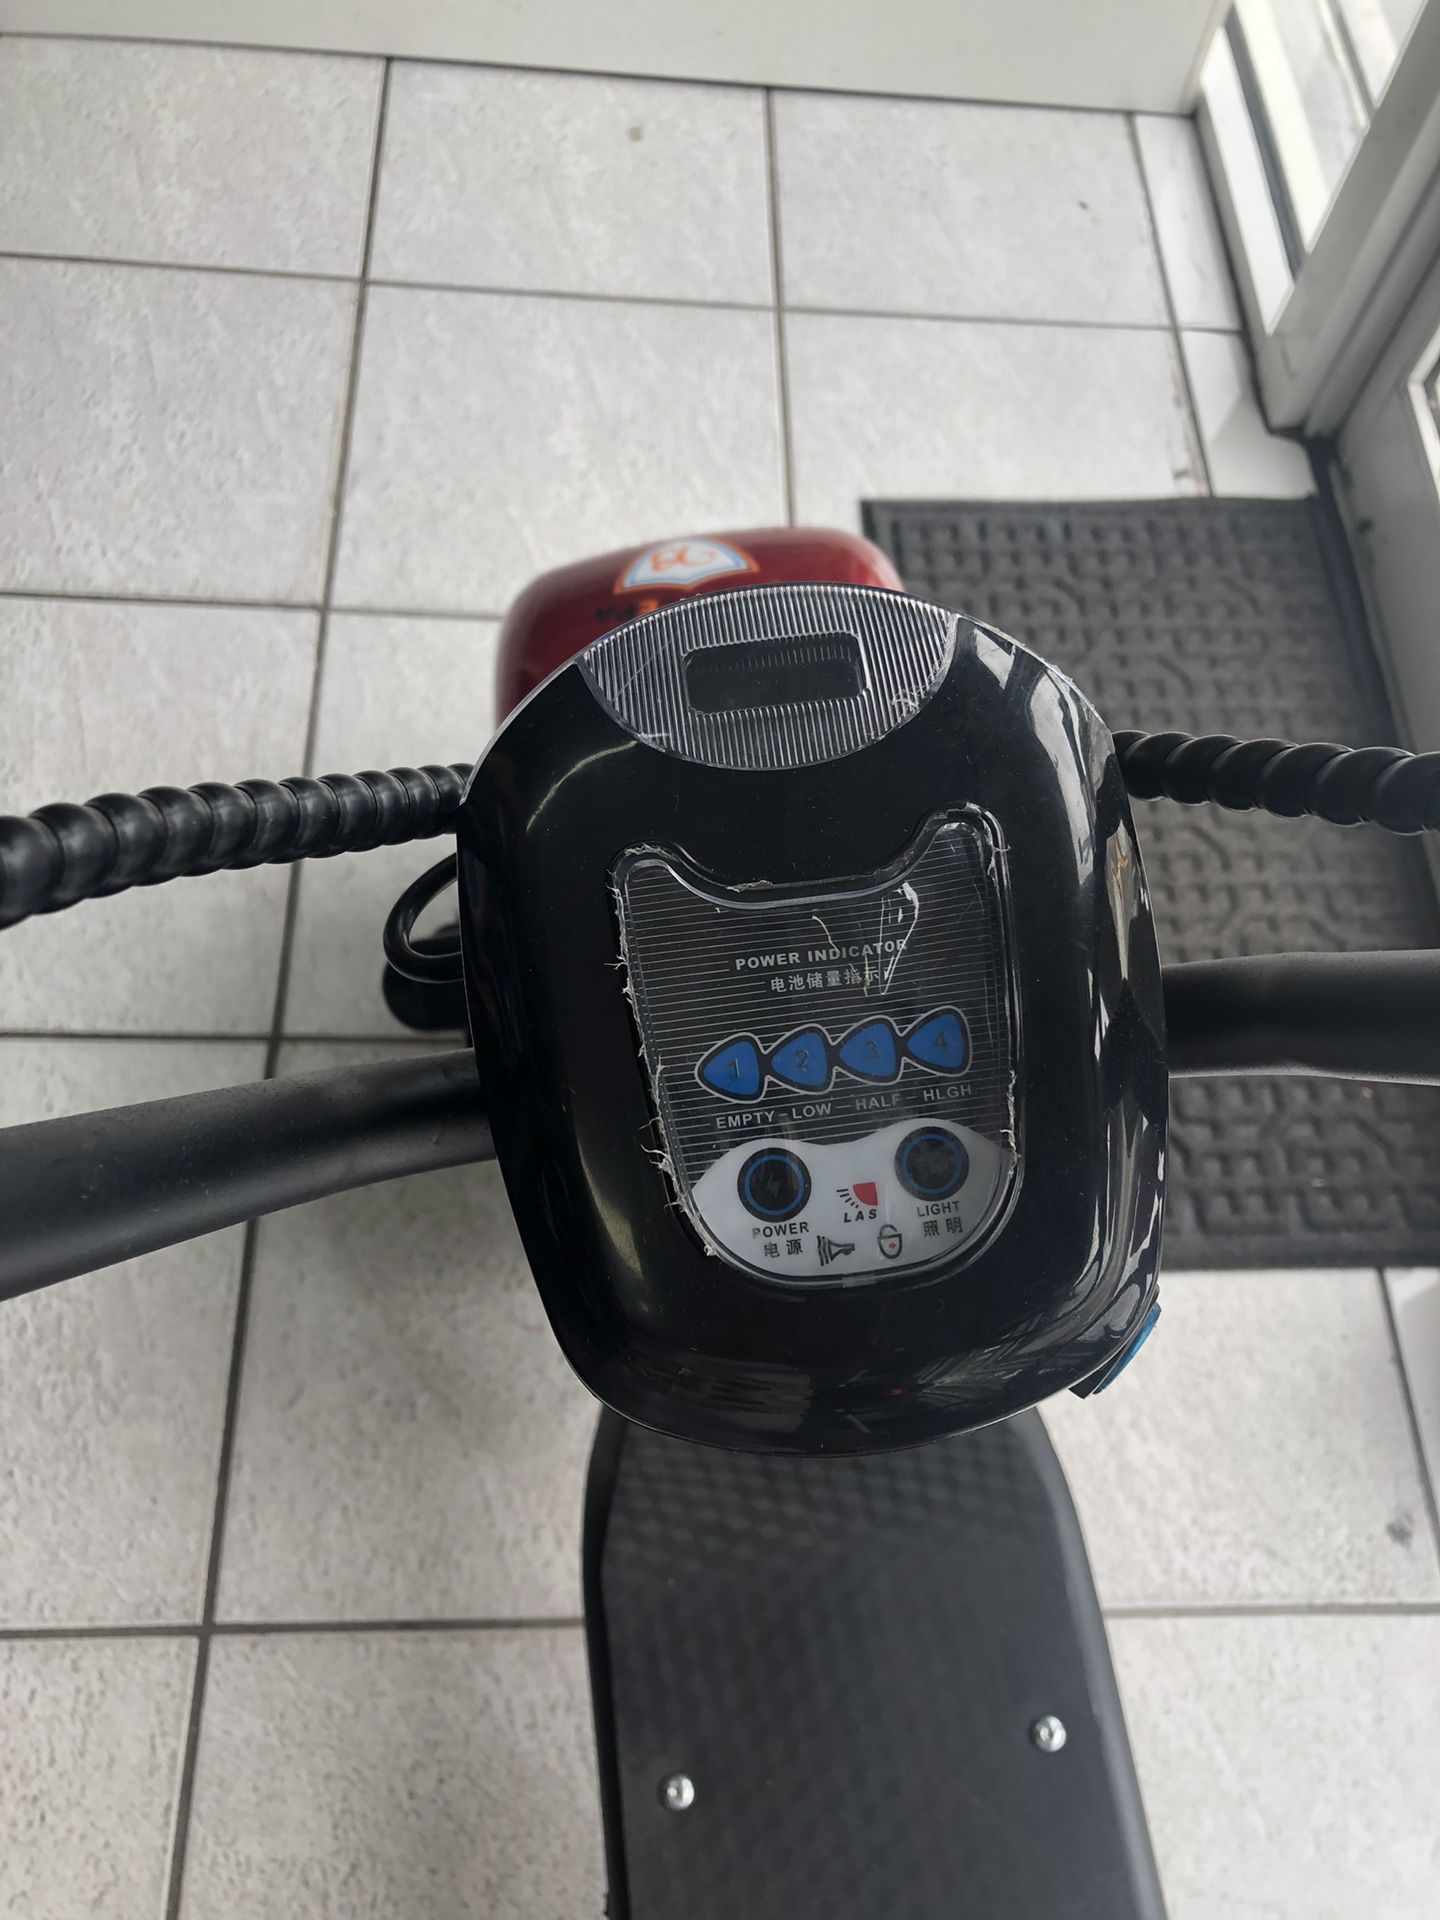 Moto electrica ,Scooter,120mph max !!4 day of batery!! Factory price(($1999))just for !!$1127!! With delivery included have to pay a little of $15.Go